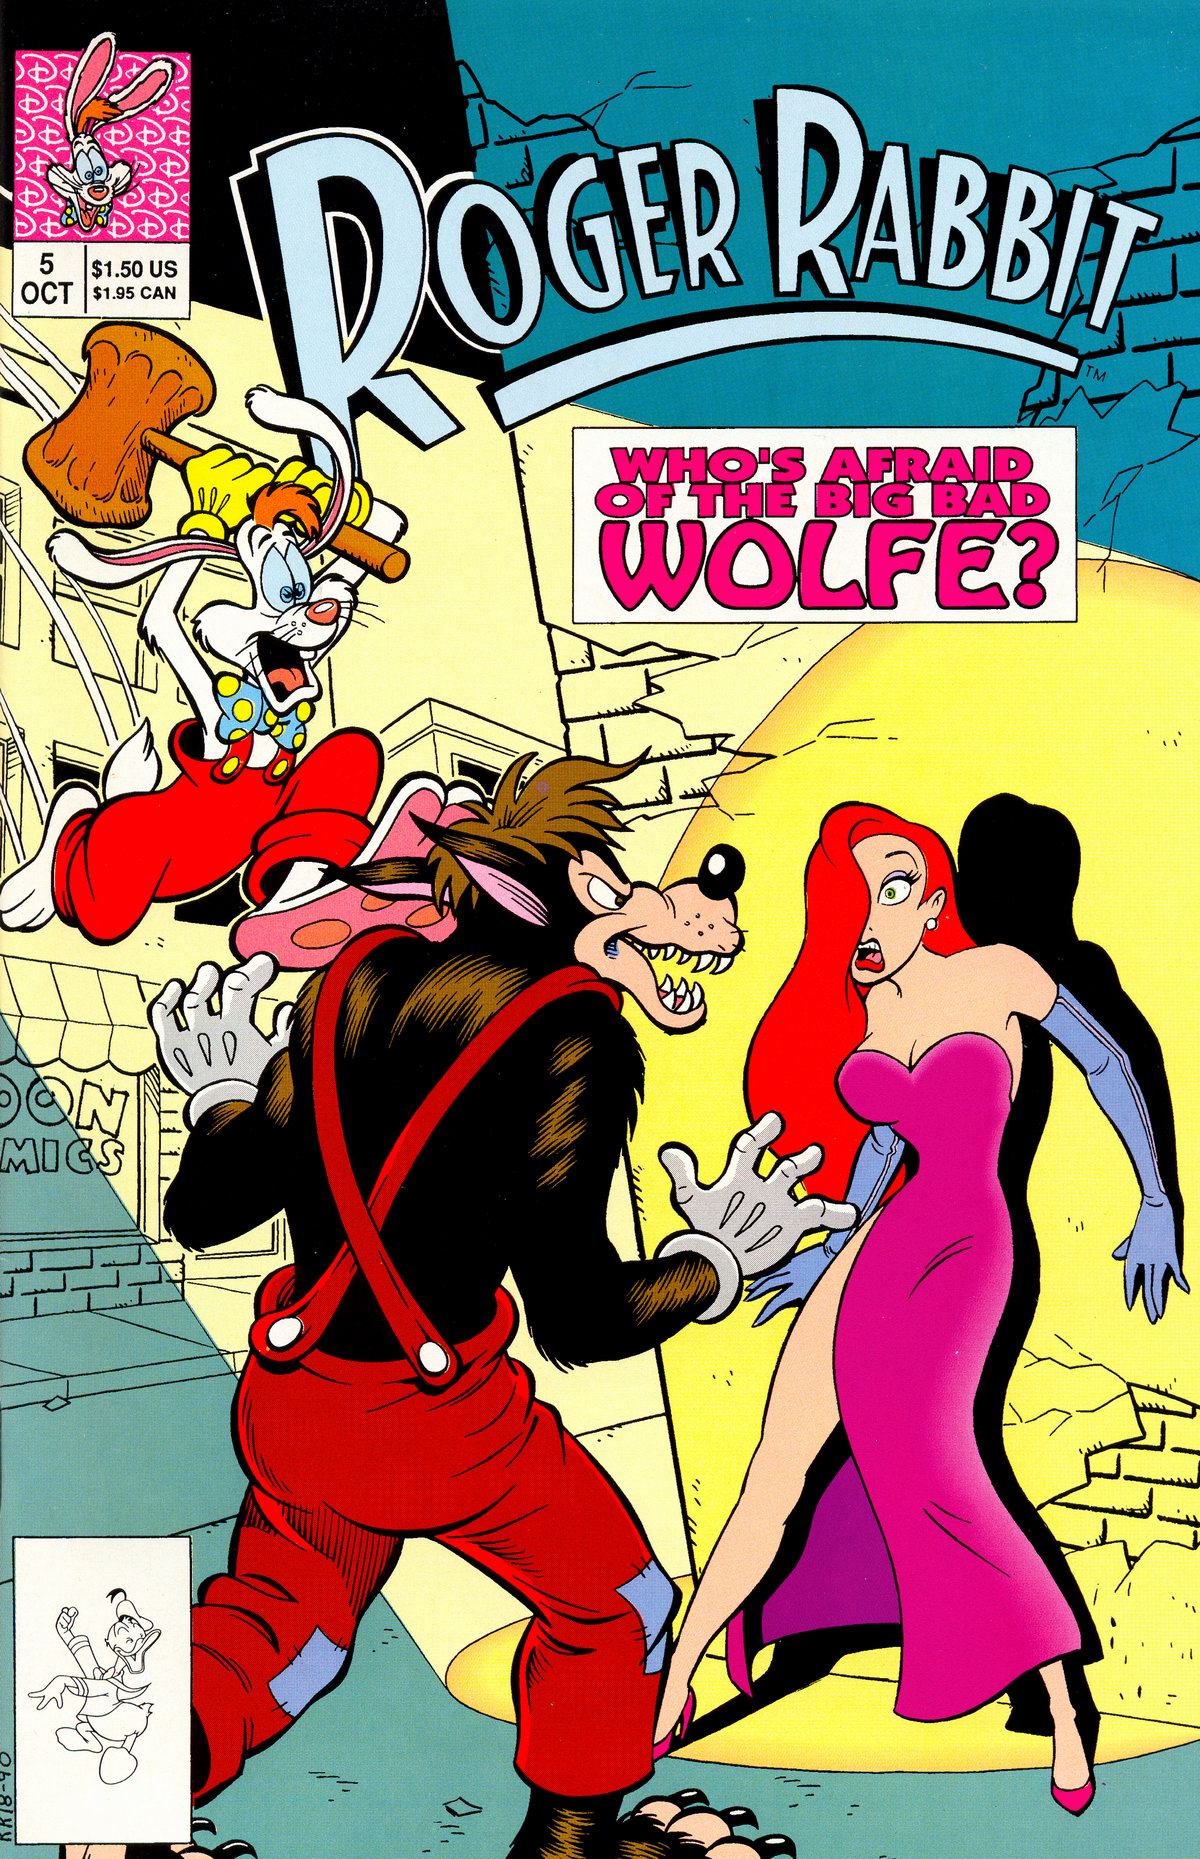 30 years of "Who Framed Roger Rabbit!": wile_e2005 — LiveJournal